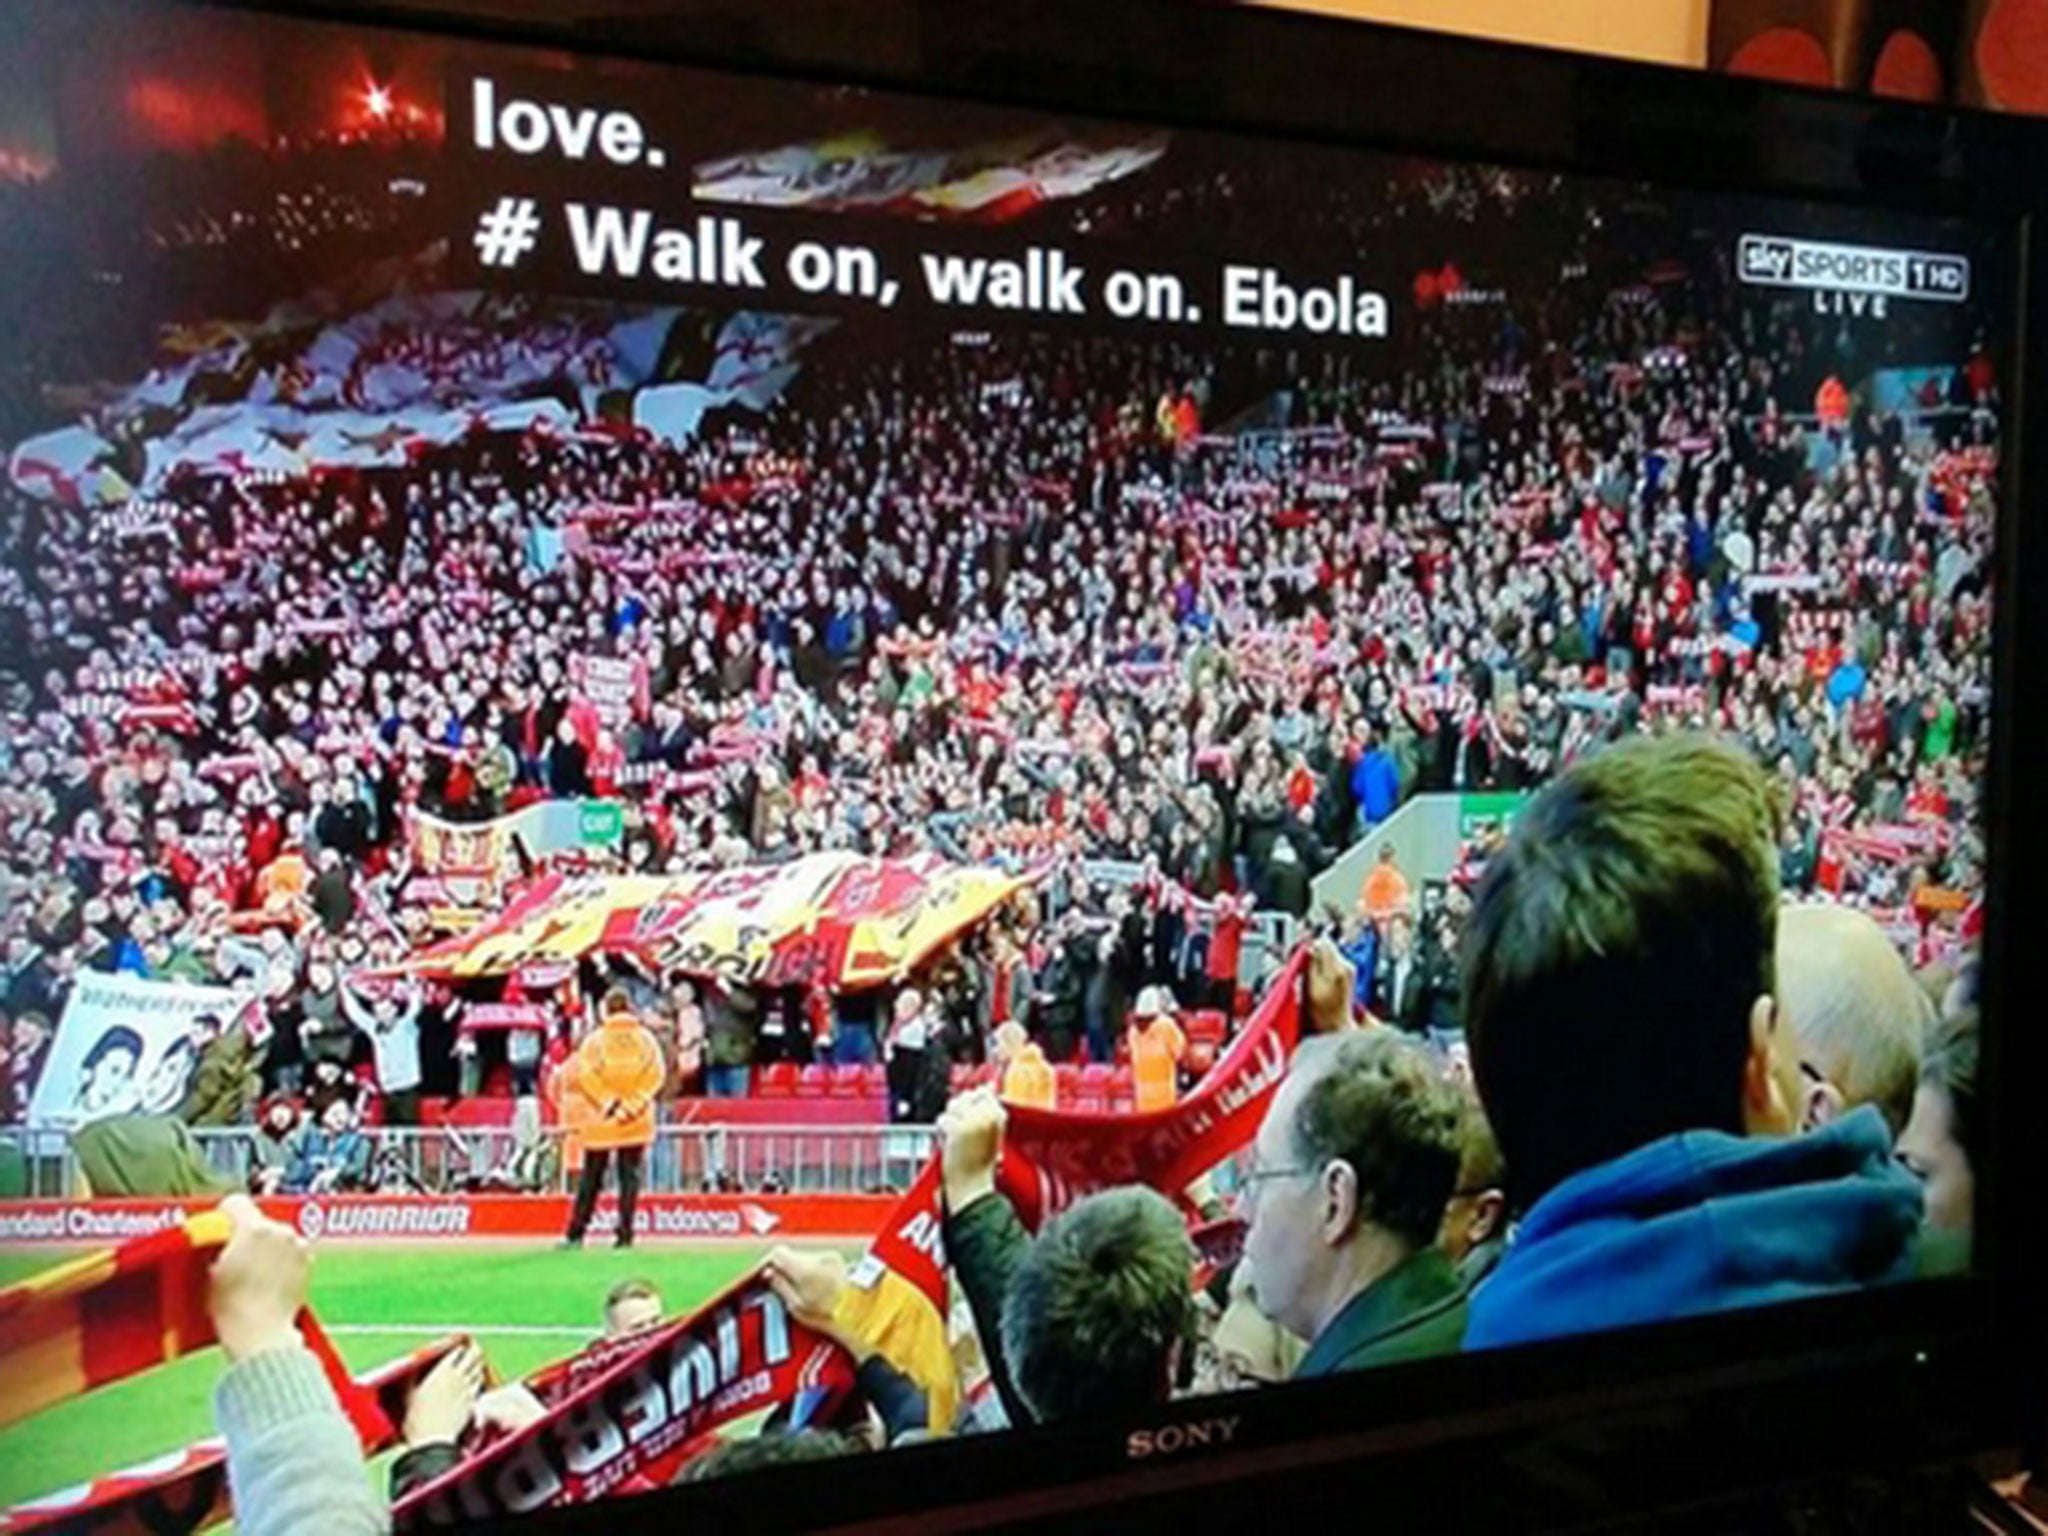 The subtitles to 'You'll Never Walk Alone' mistakenly include the word Ebola